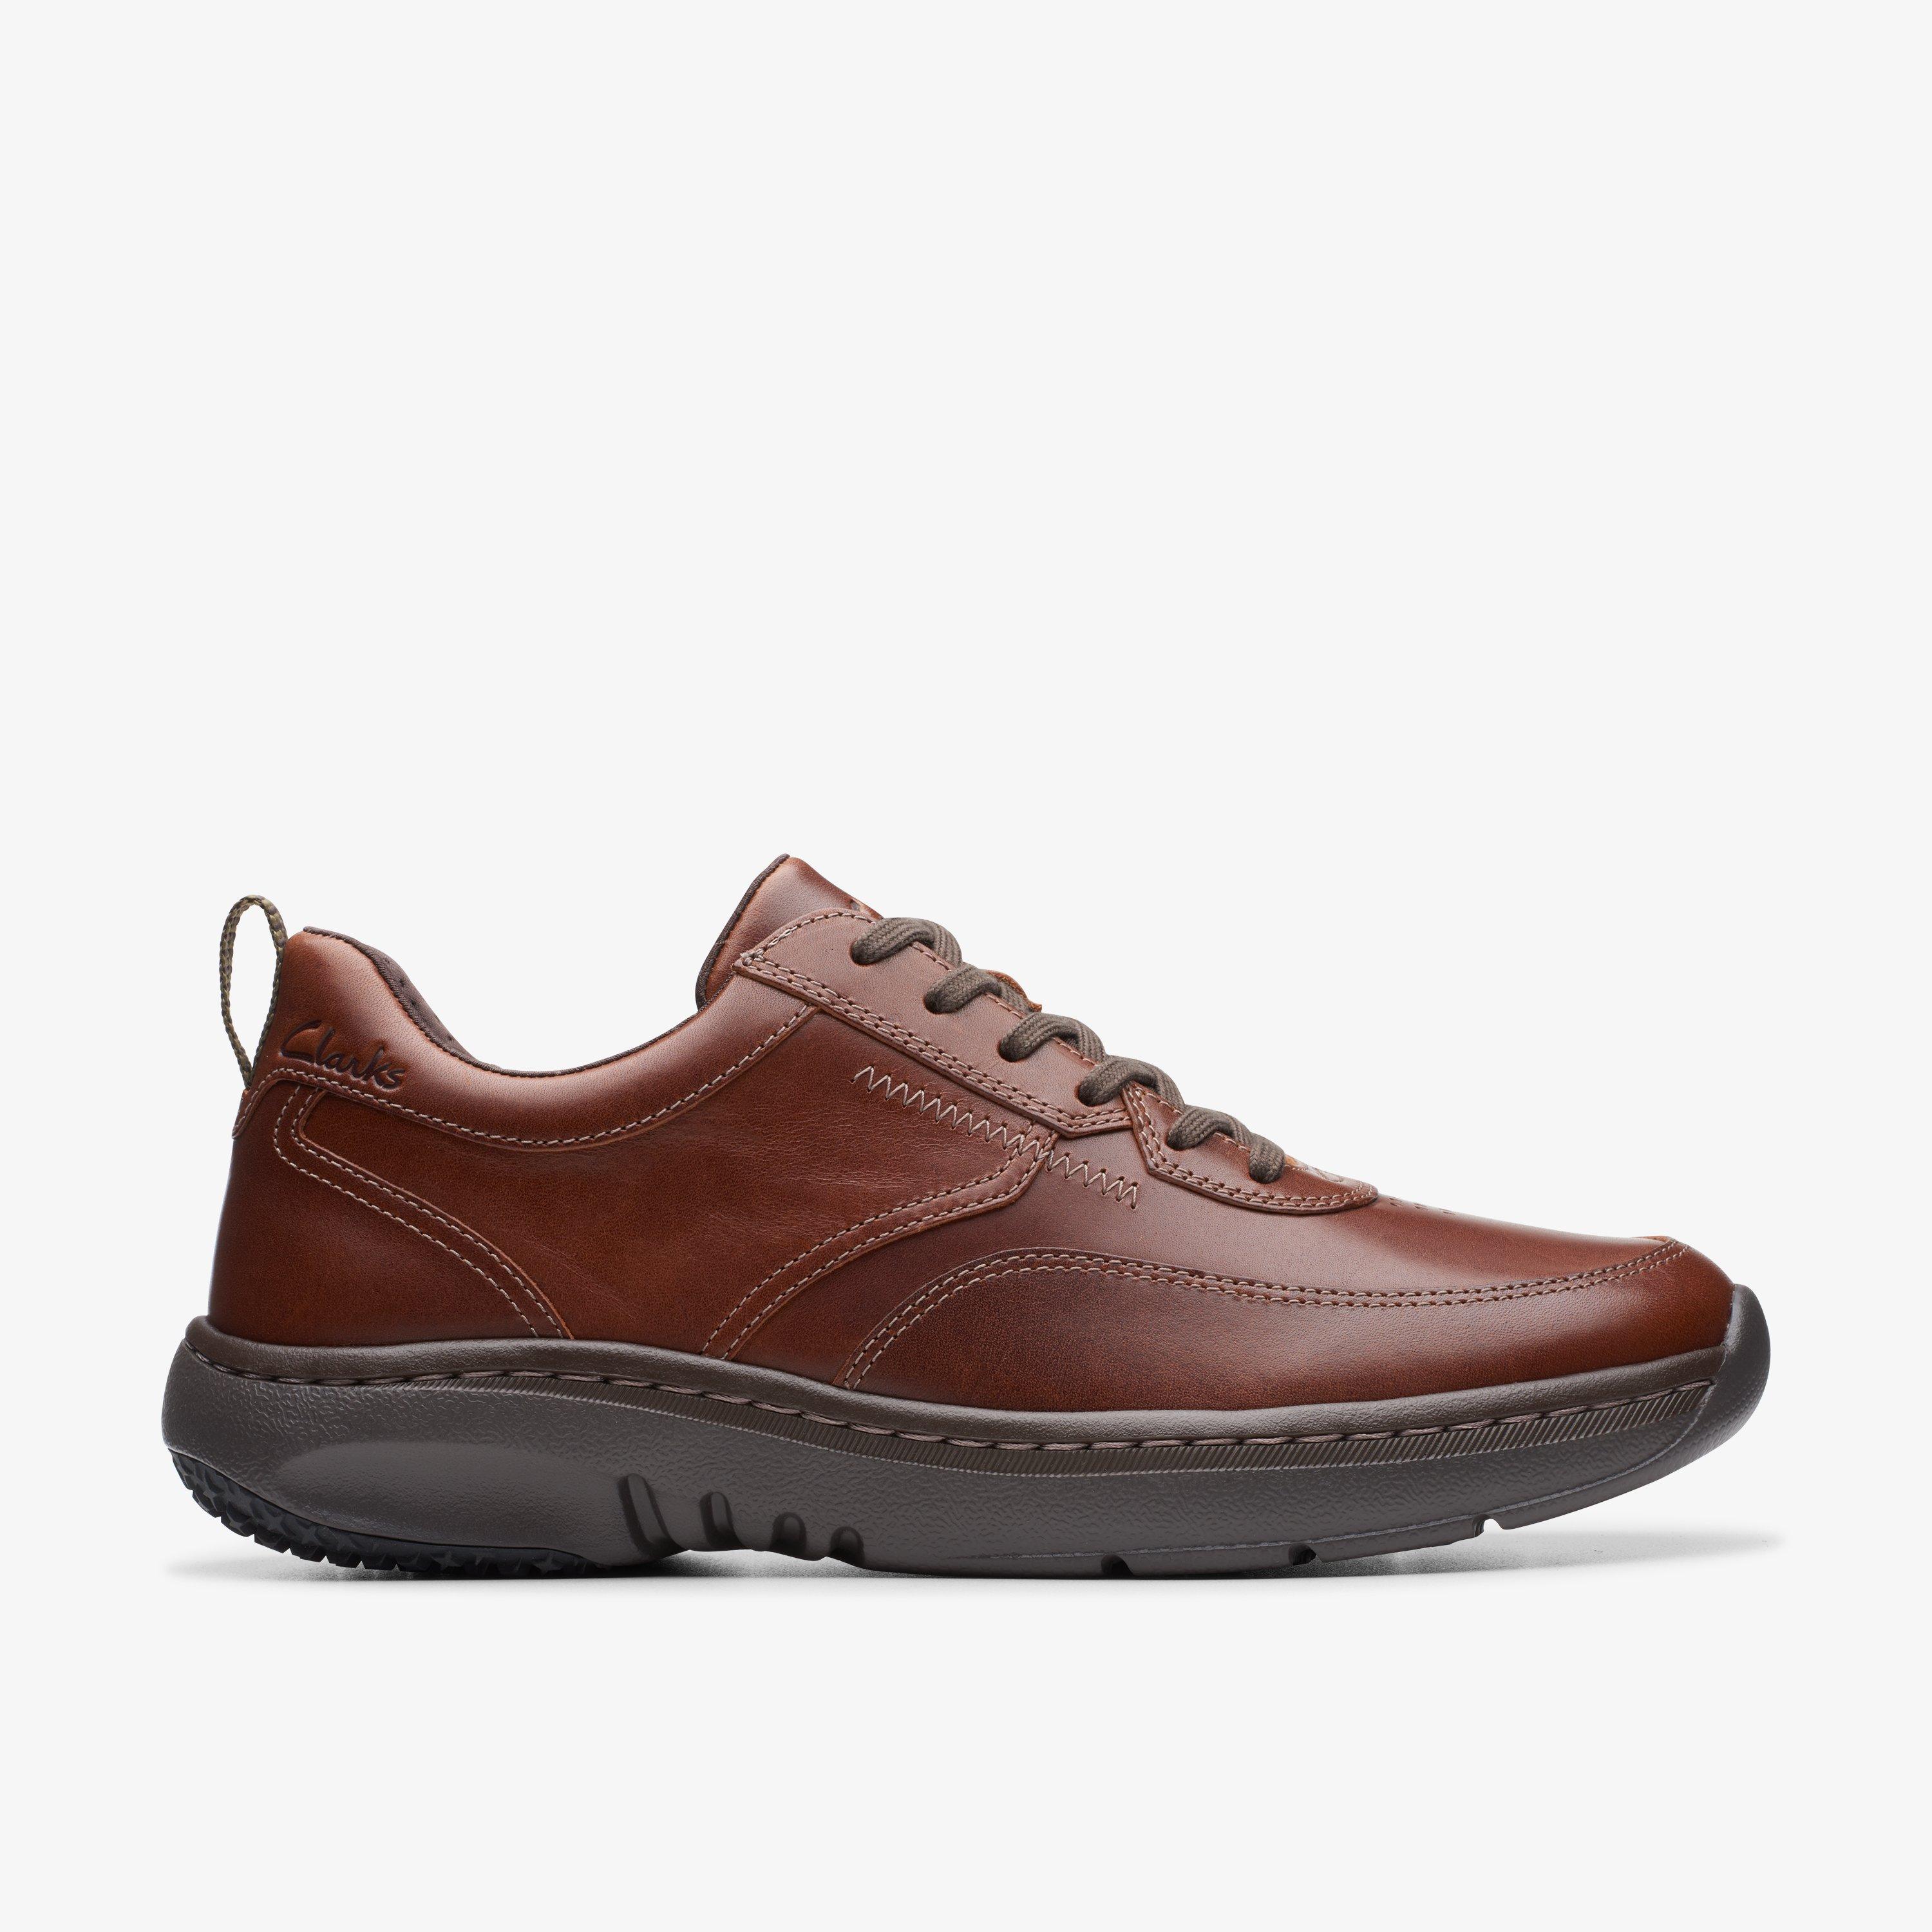 Mens Clarks Pro Lace Dark Tan Leather Shoes | Clarks UK